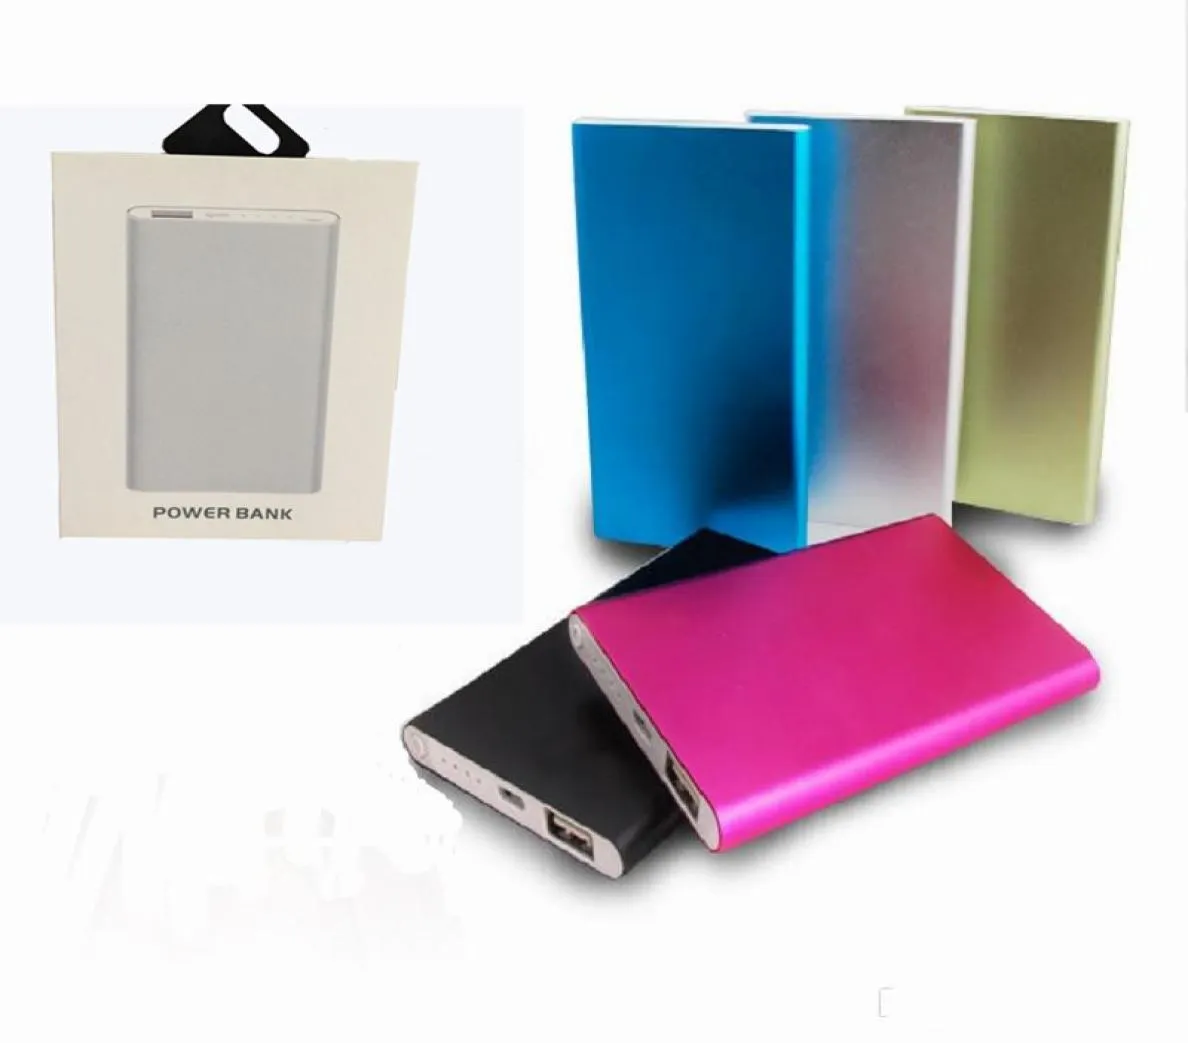 Power Bank mobile battery 8800mAh External Battery Powerbank Tablet PC Charger Cell Phone Power Banks usb cablce With Retail Box7921270